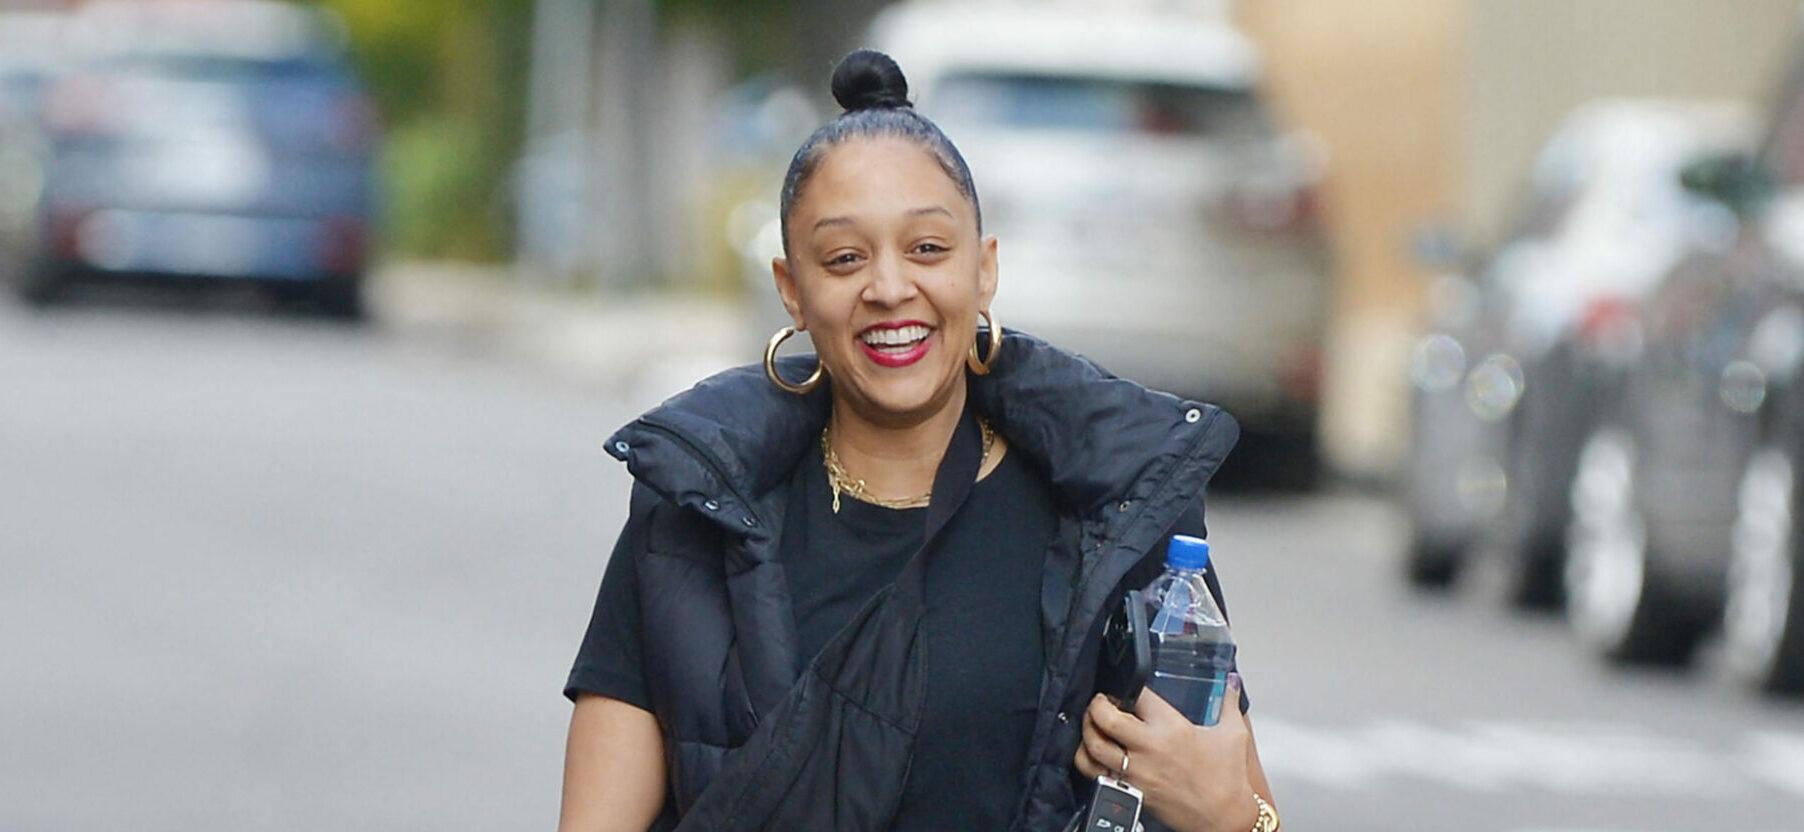 Tia Mowry Celebrates Fitness Journey Inspired With Jaw-Dropping Weight Loss Pics